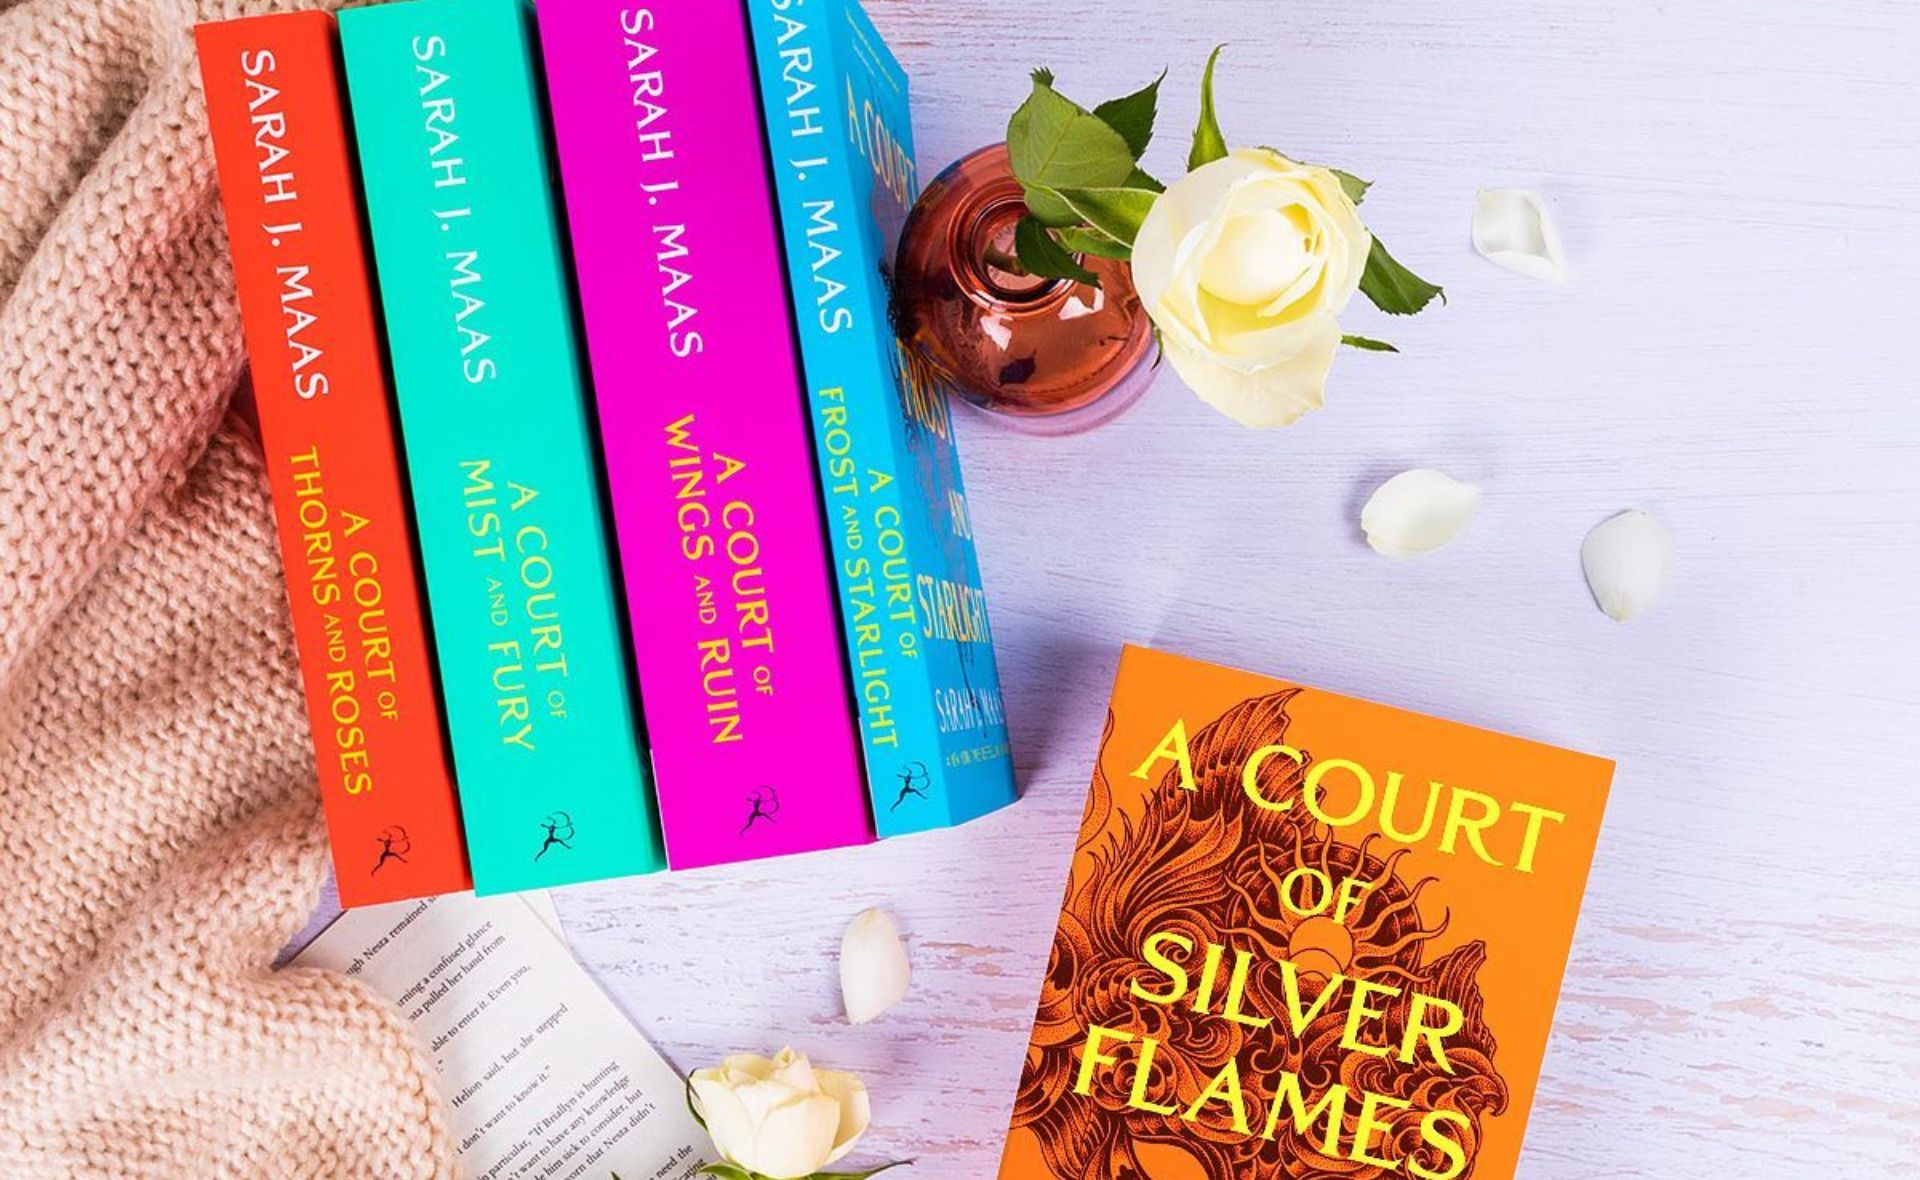 Everything you need to know about the A Court of Thorns and Roses TV series